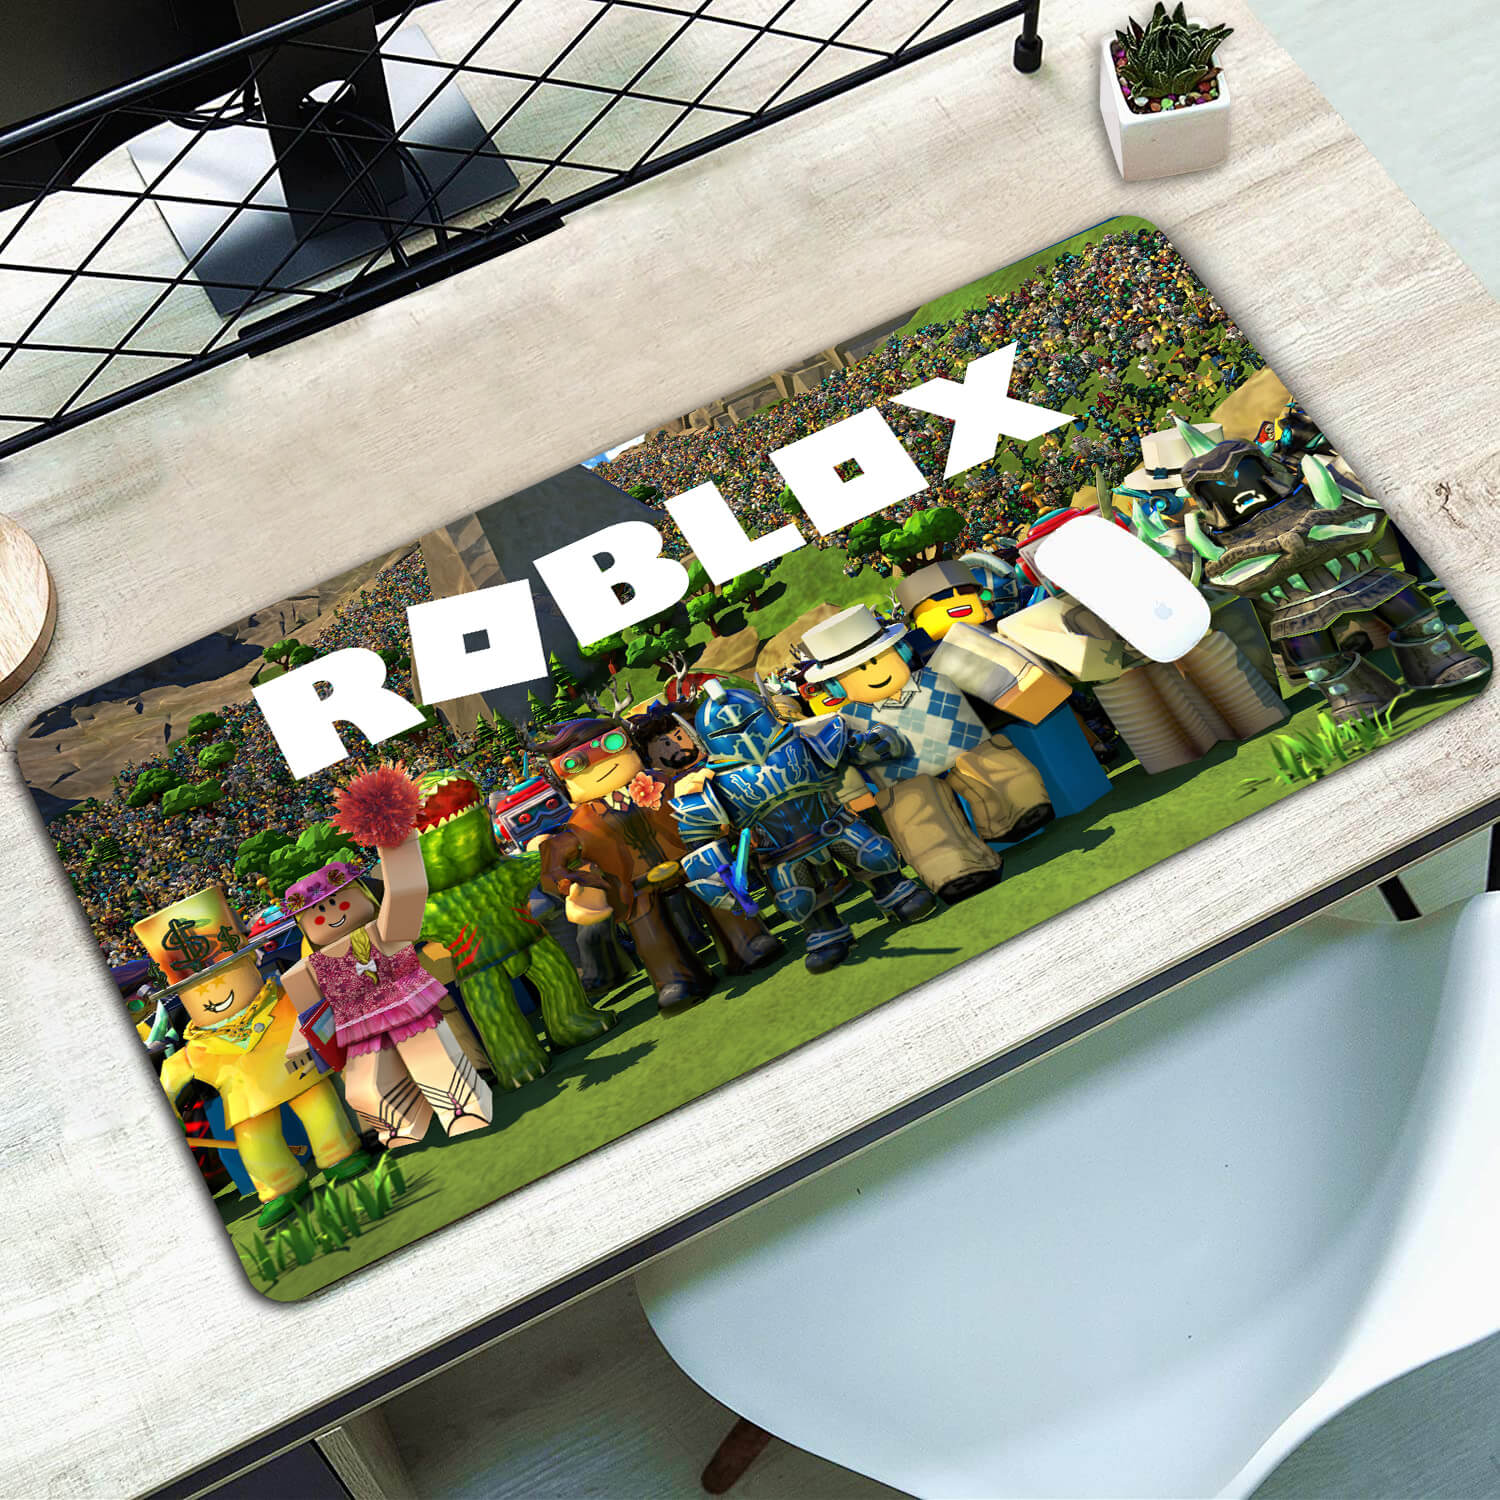 ROBLOX Mousepad Beautiful Durable Rubber Mouse Mat Pad Size For